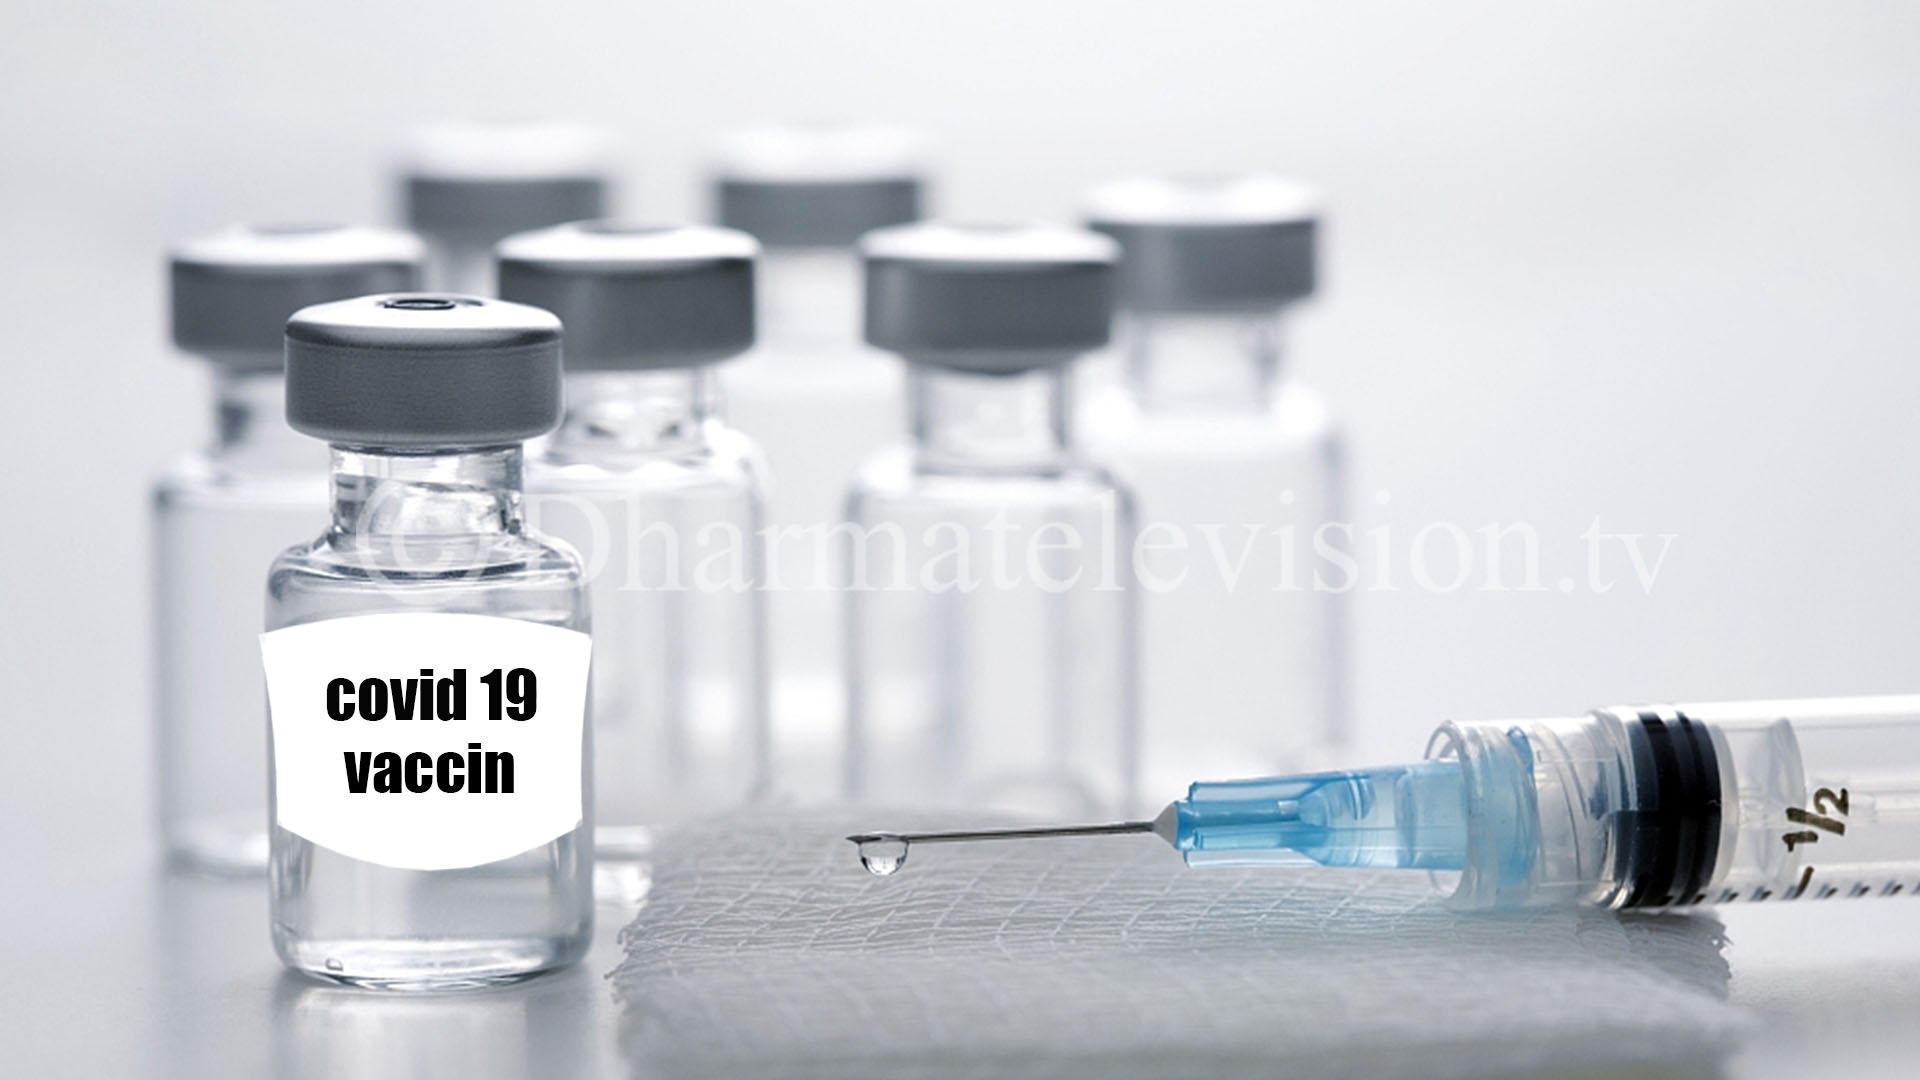 India Joins the Race To Develop and Test COVID-19 Vaccine